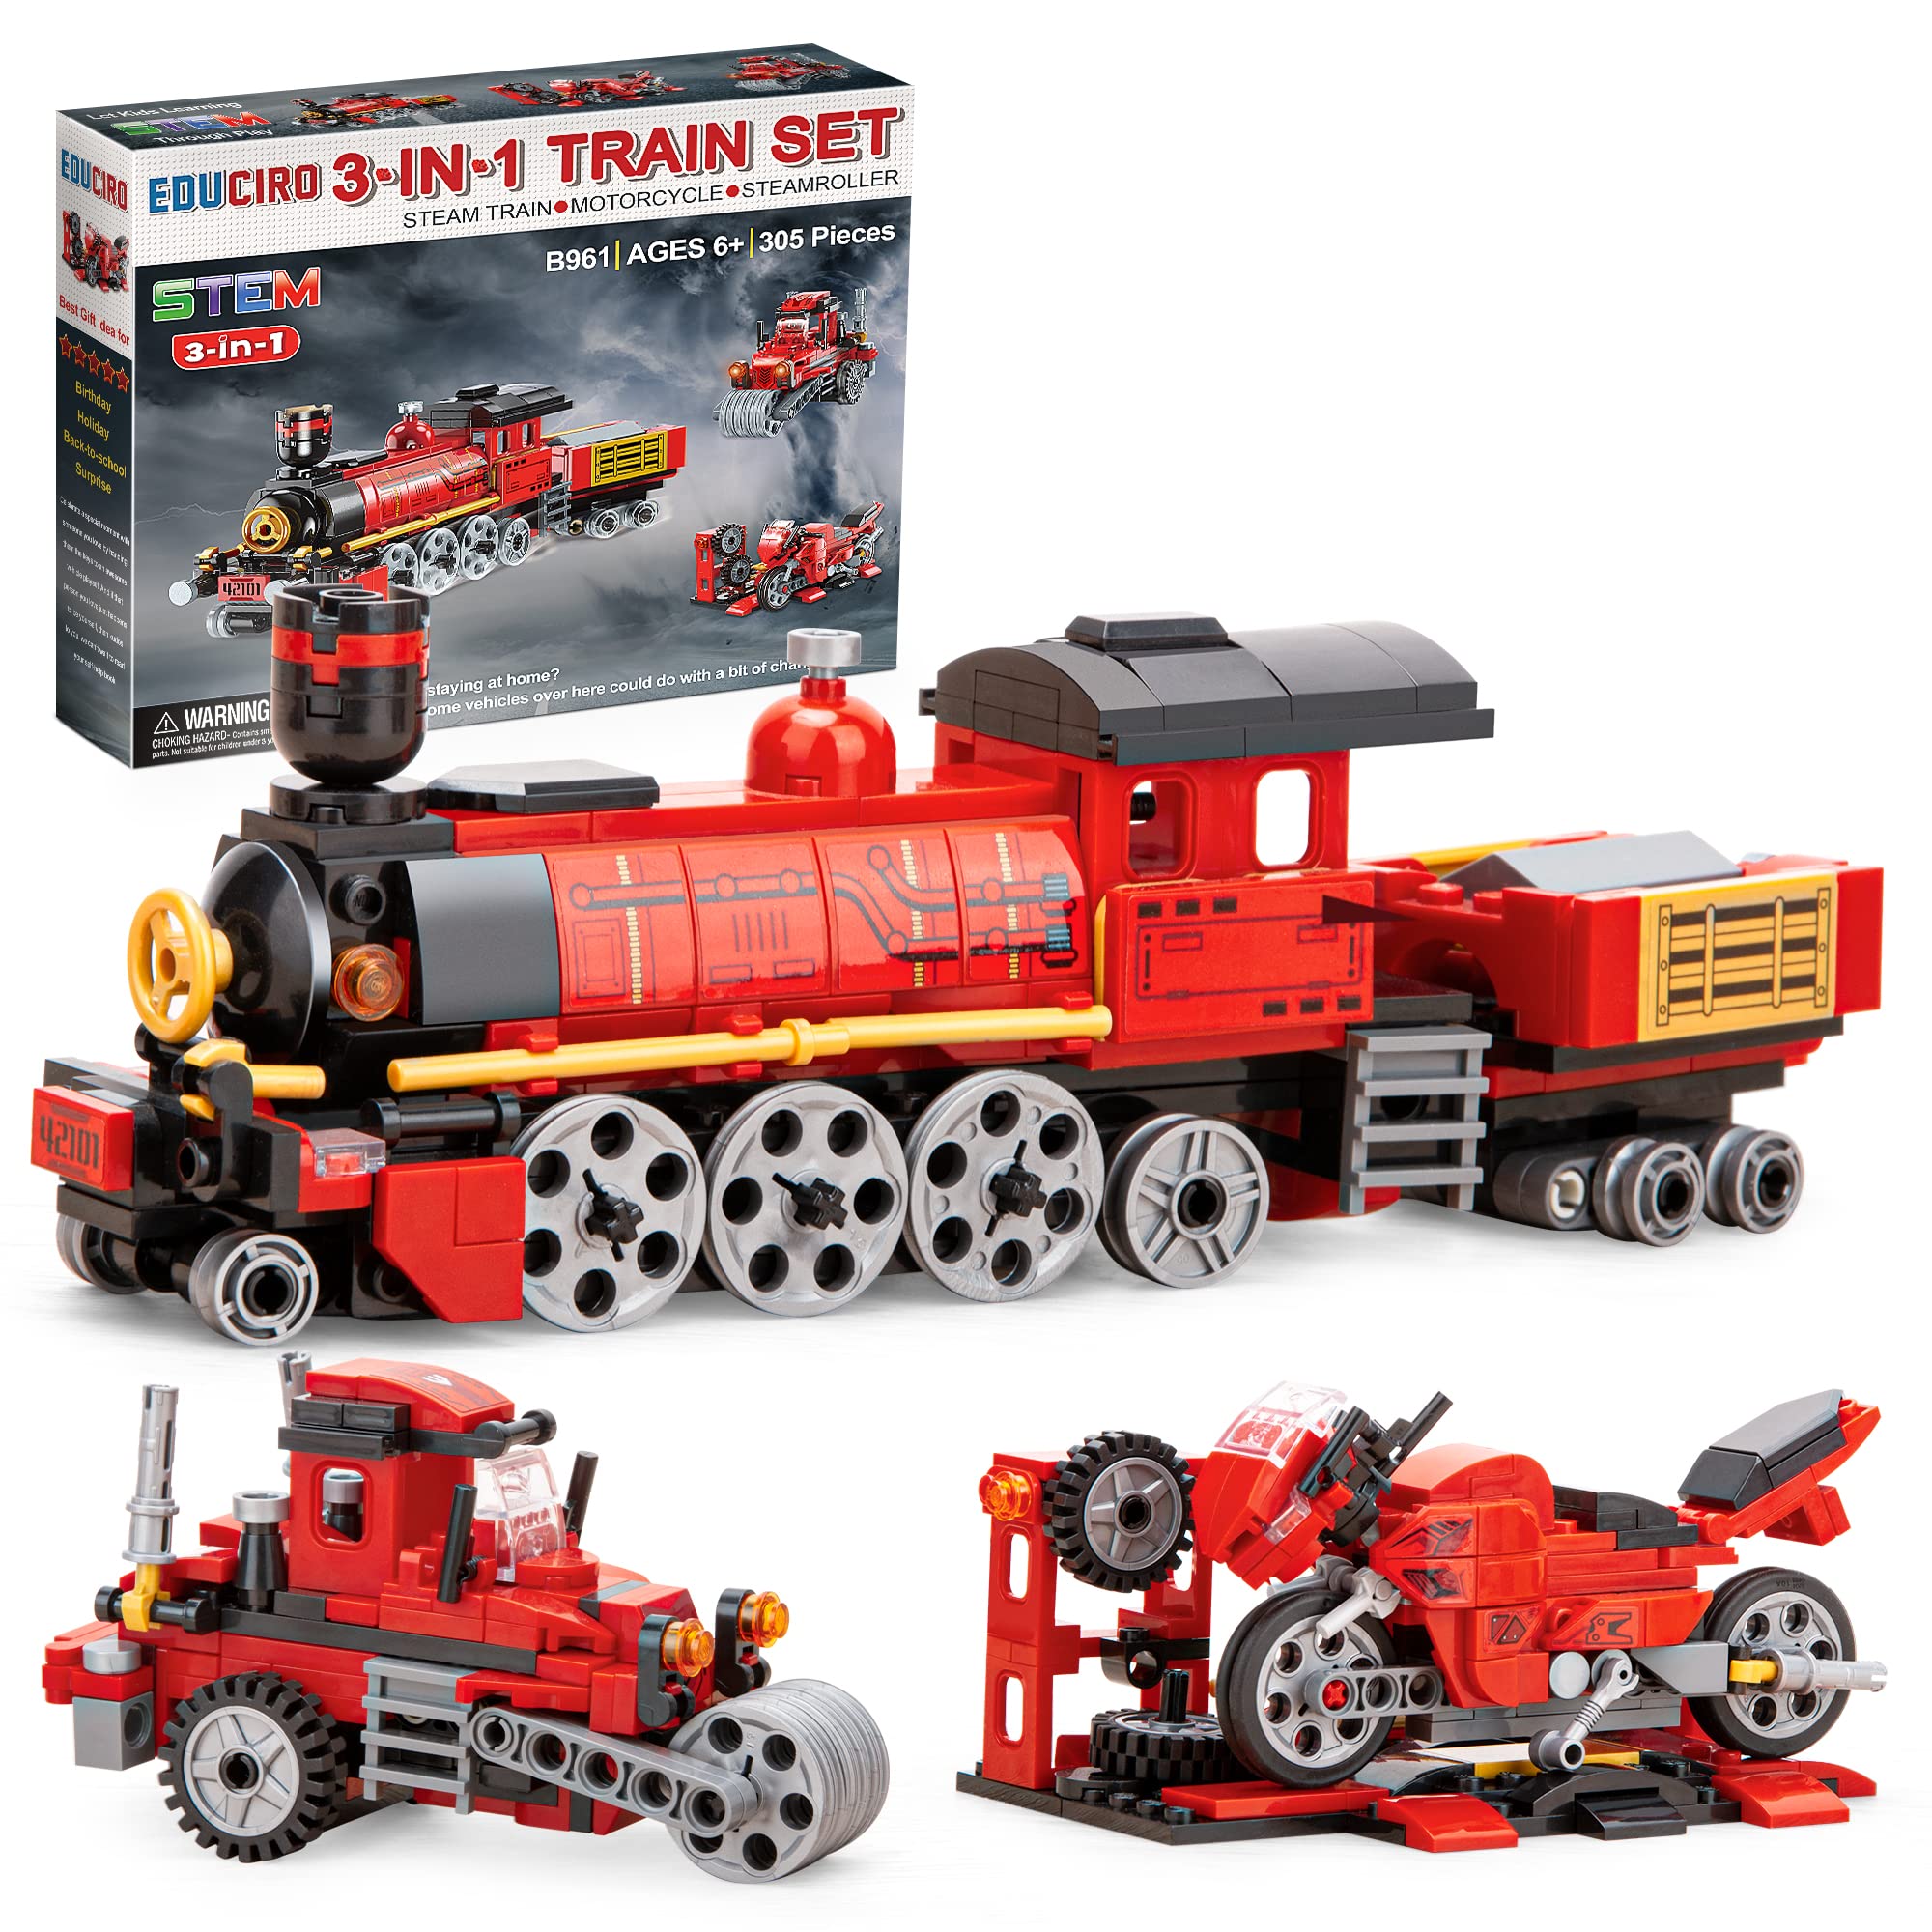 EDUCIRO Harry Train Toys 3in1 Building Kit (305 Pieces), Interactive Gifts Creator Sets Featuring Motorcycle and Steamroller for Boys, Girls, and Kids Ages 6+